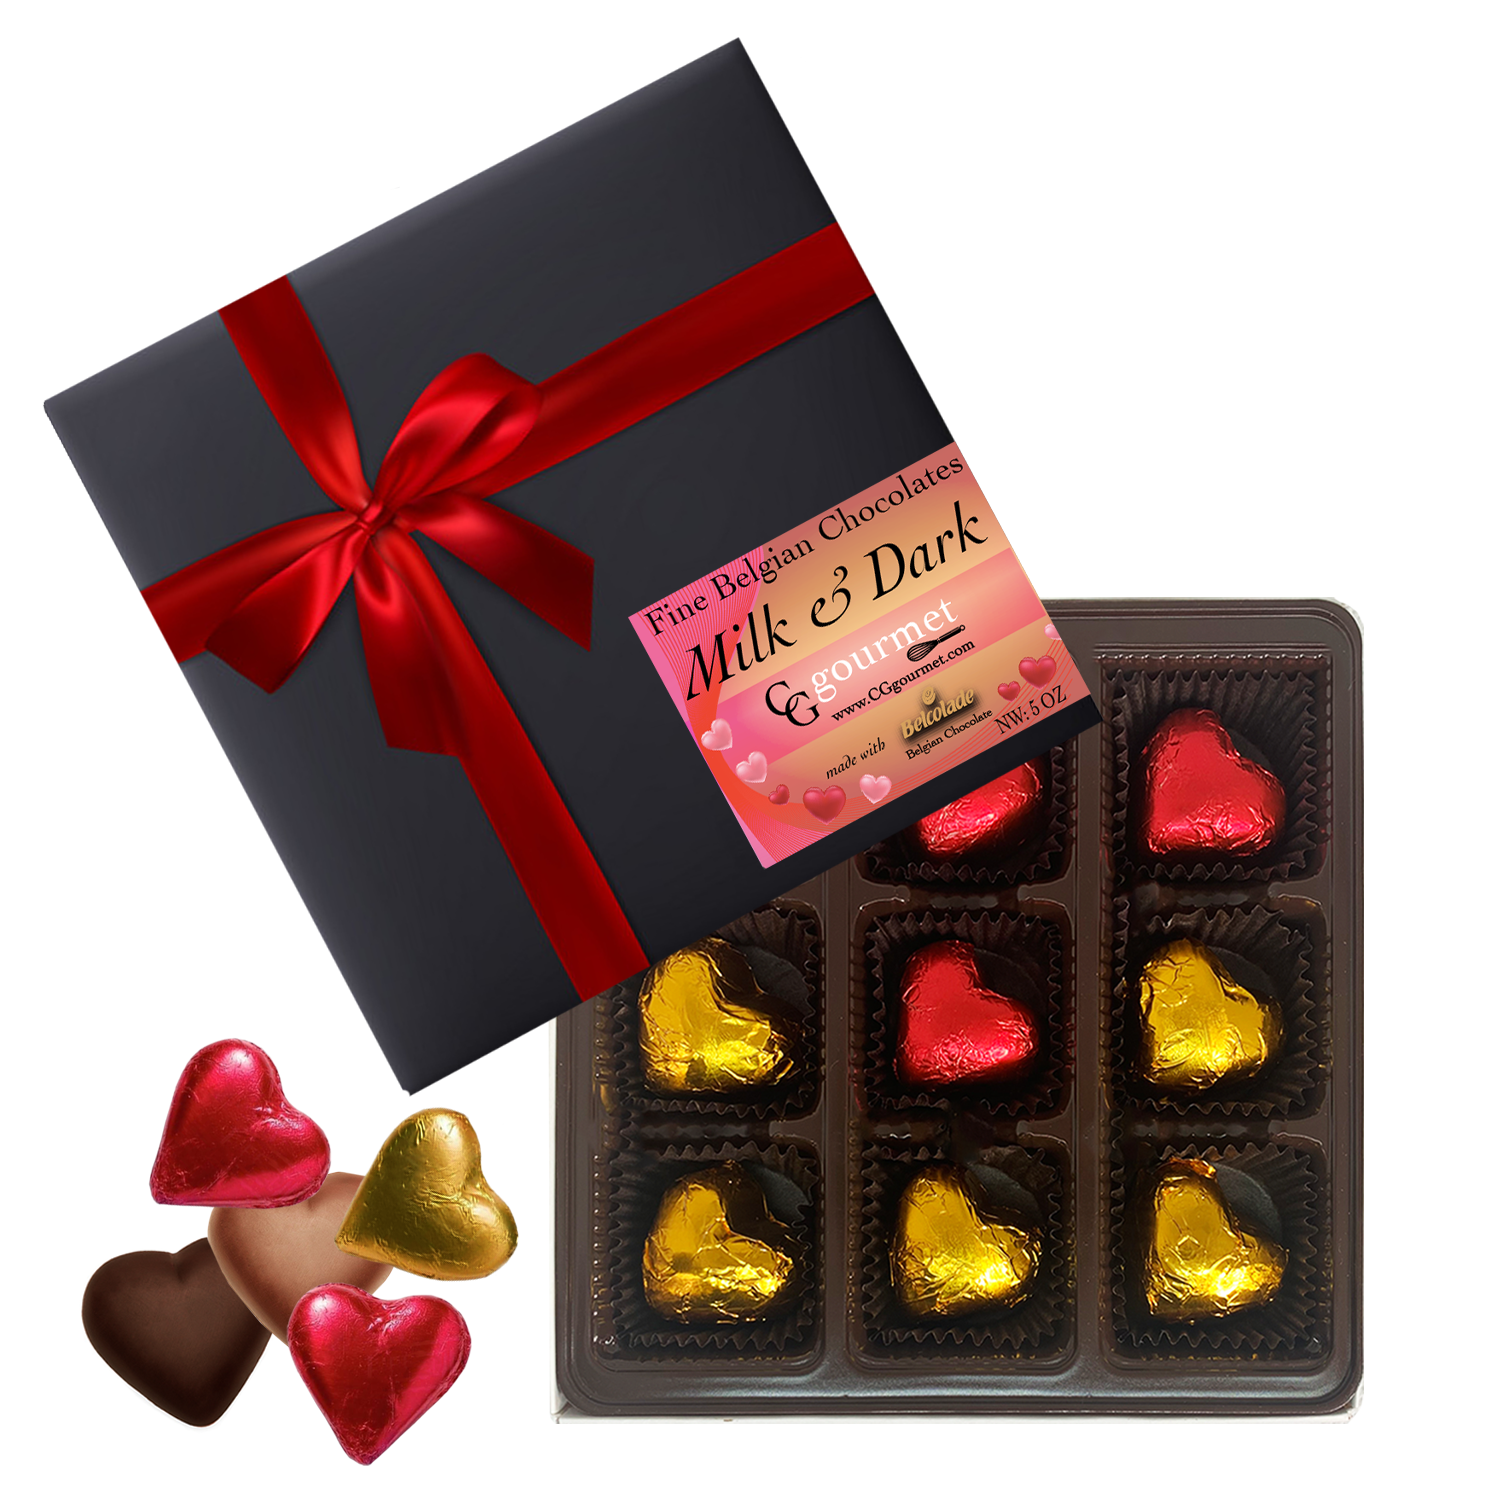 Chocolate day gift: Best Chocolate Day gifts for your Valentine; Explore  Best Picks Here - The Economic Times